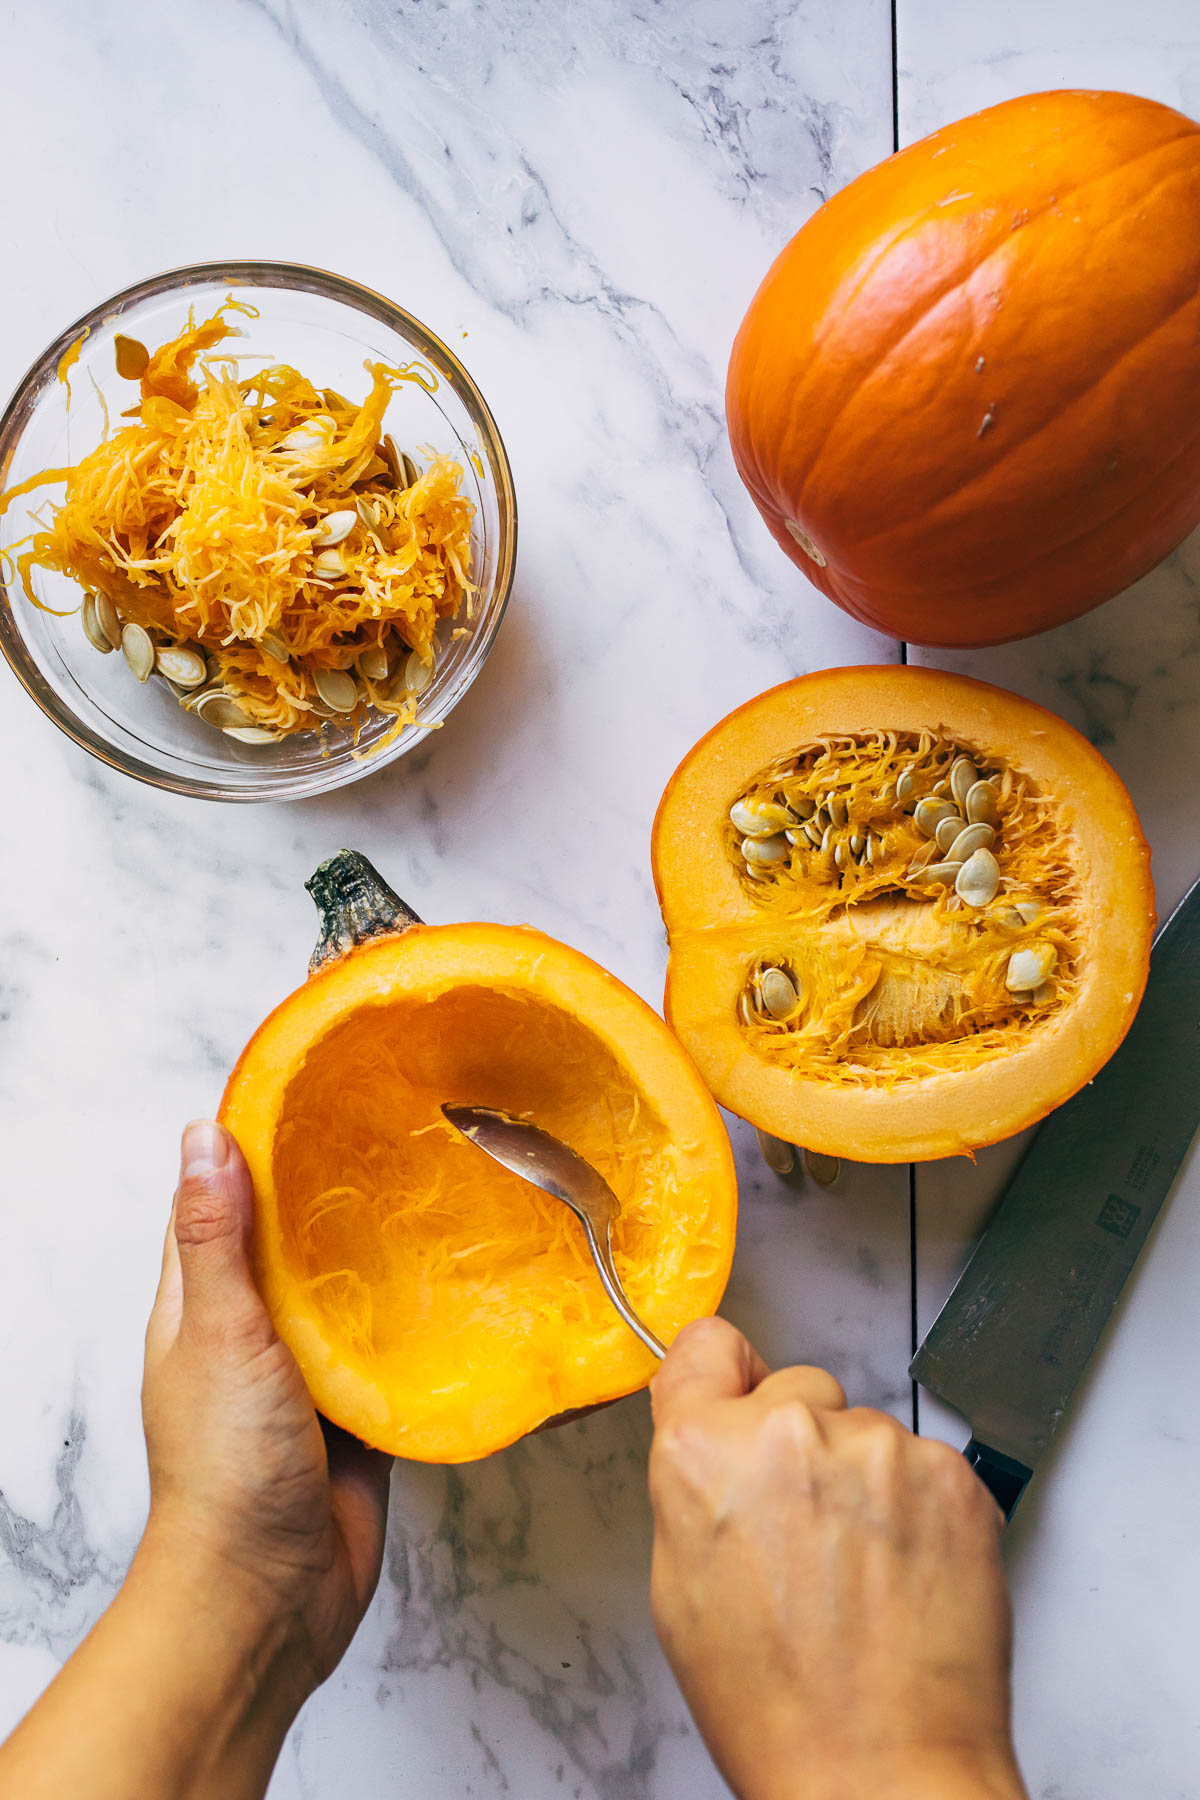 A hand scooping strings out of a small pumpkin with a spoon.